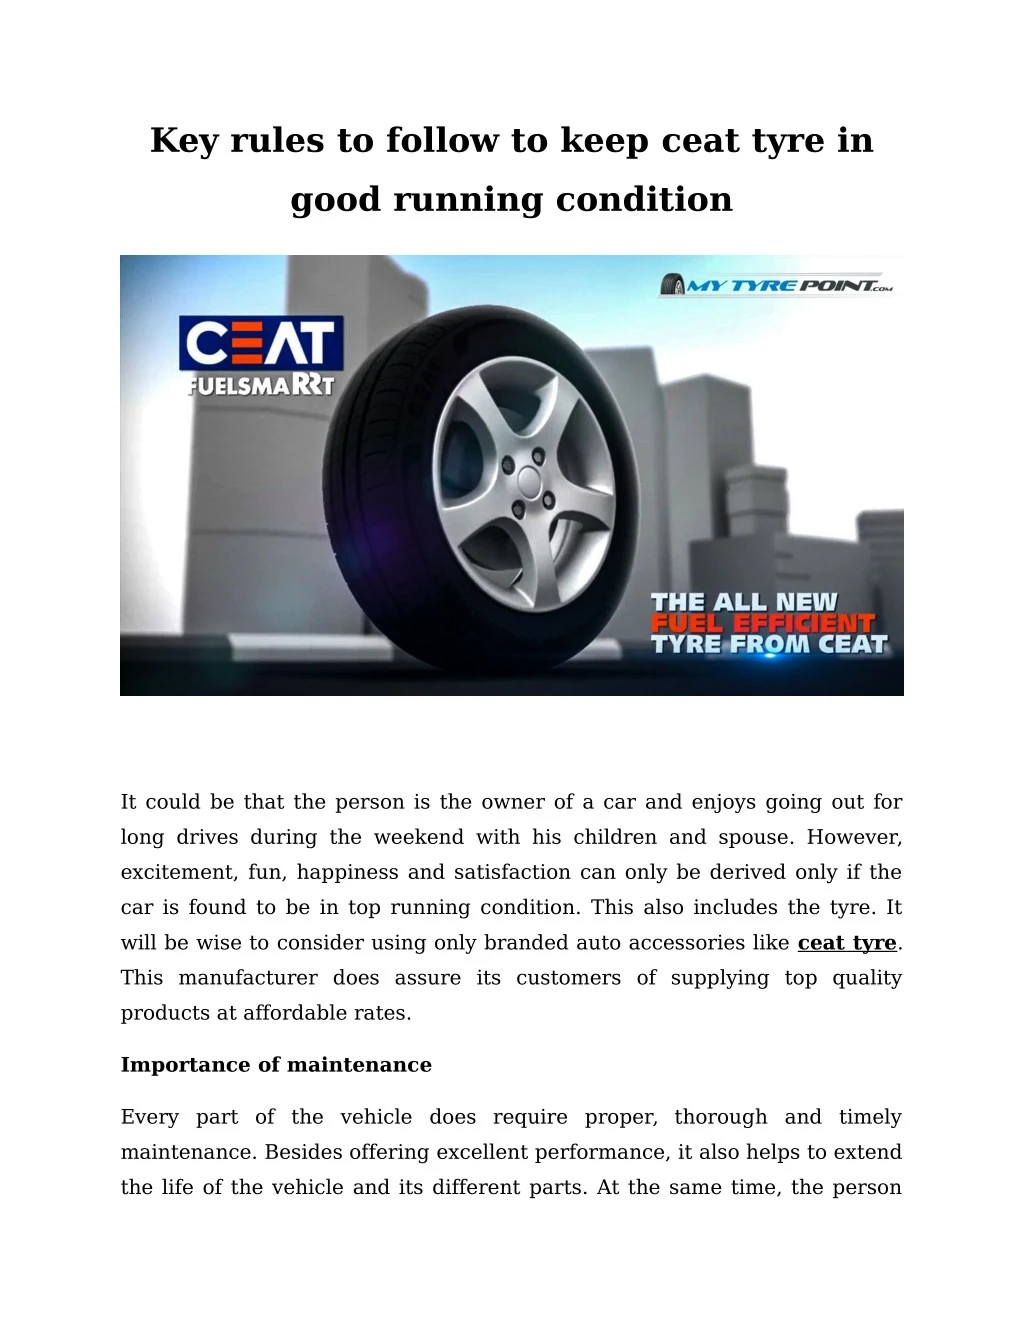 key rules to follow to keep ceat tyre in